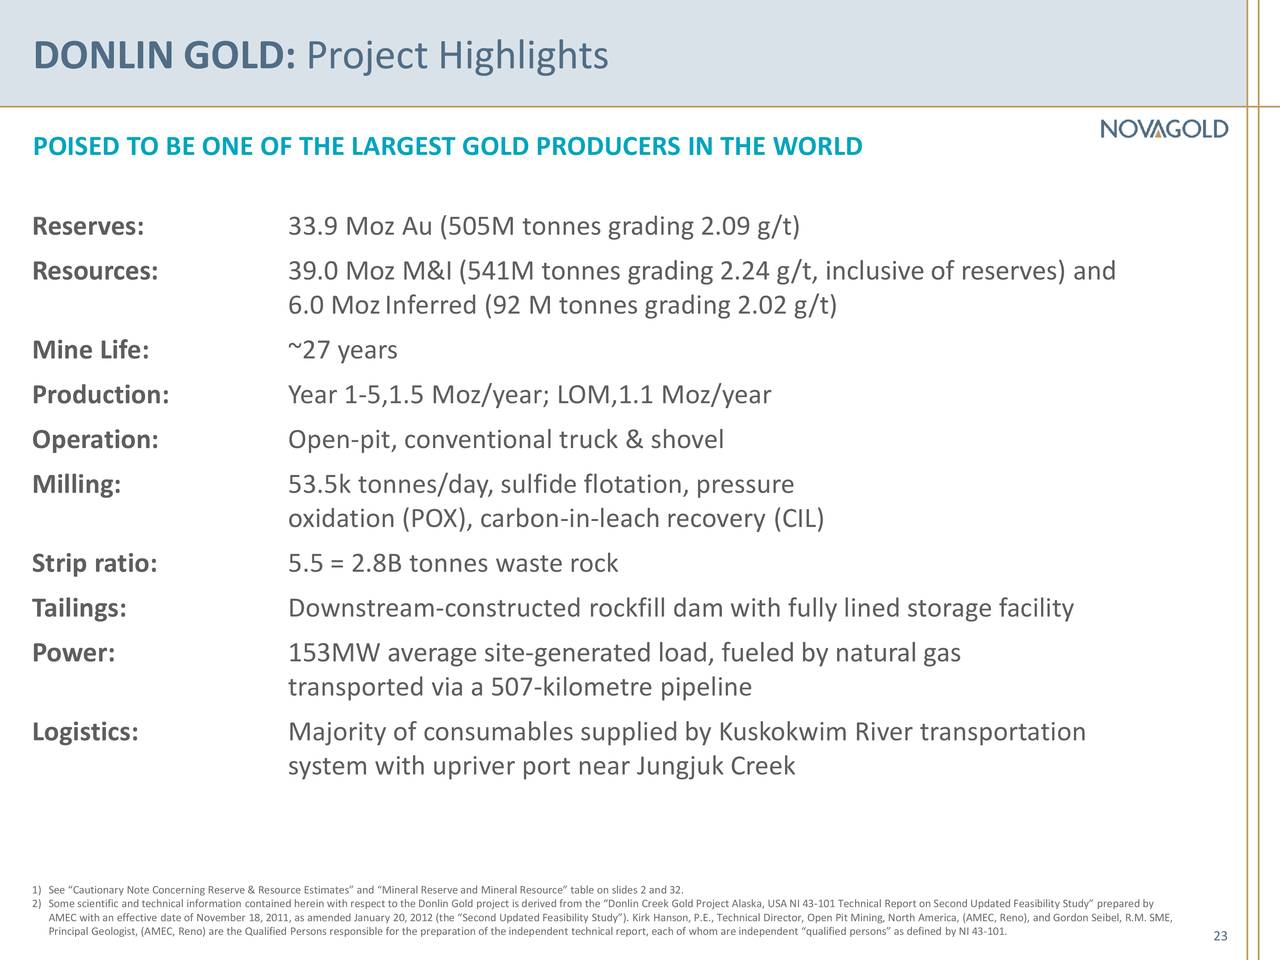 DONLIN GOLD: Project Highlights